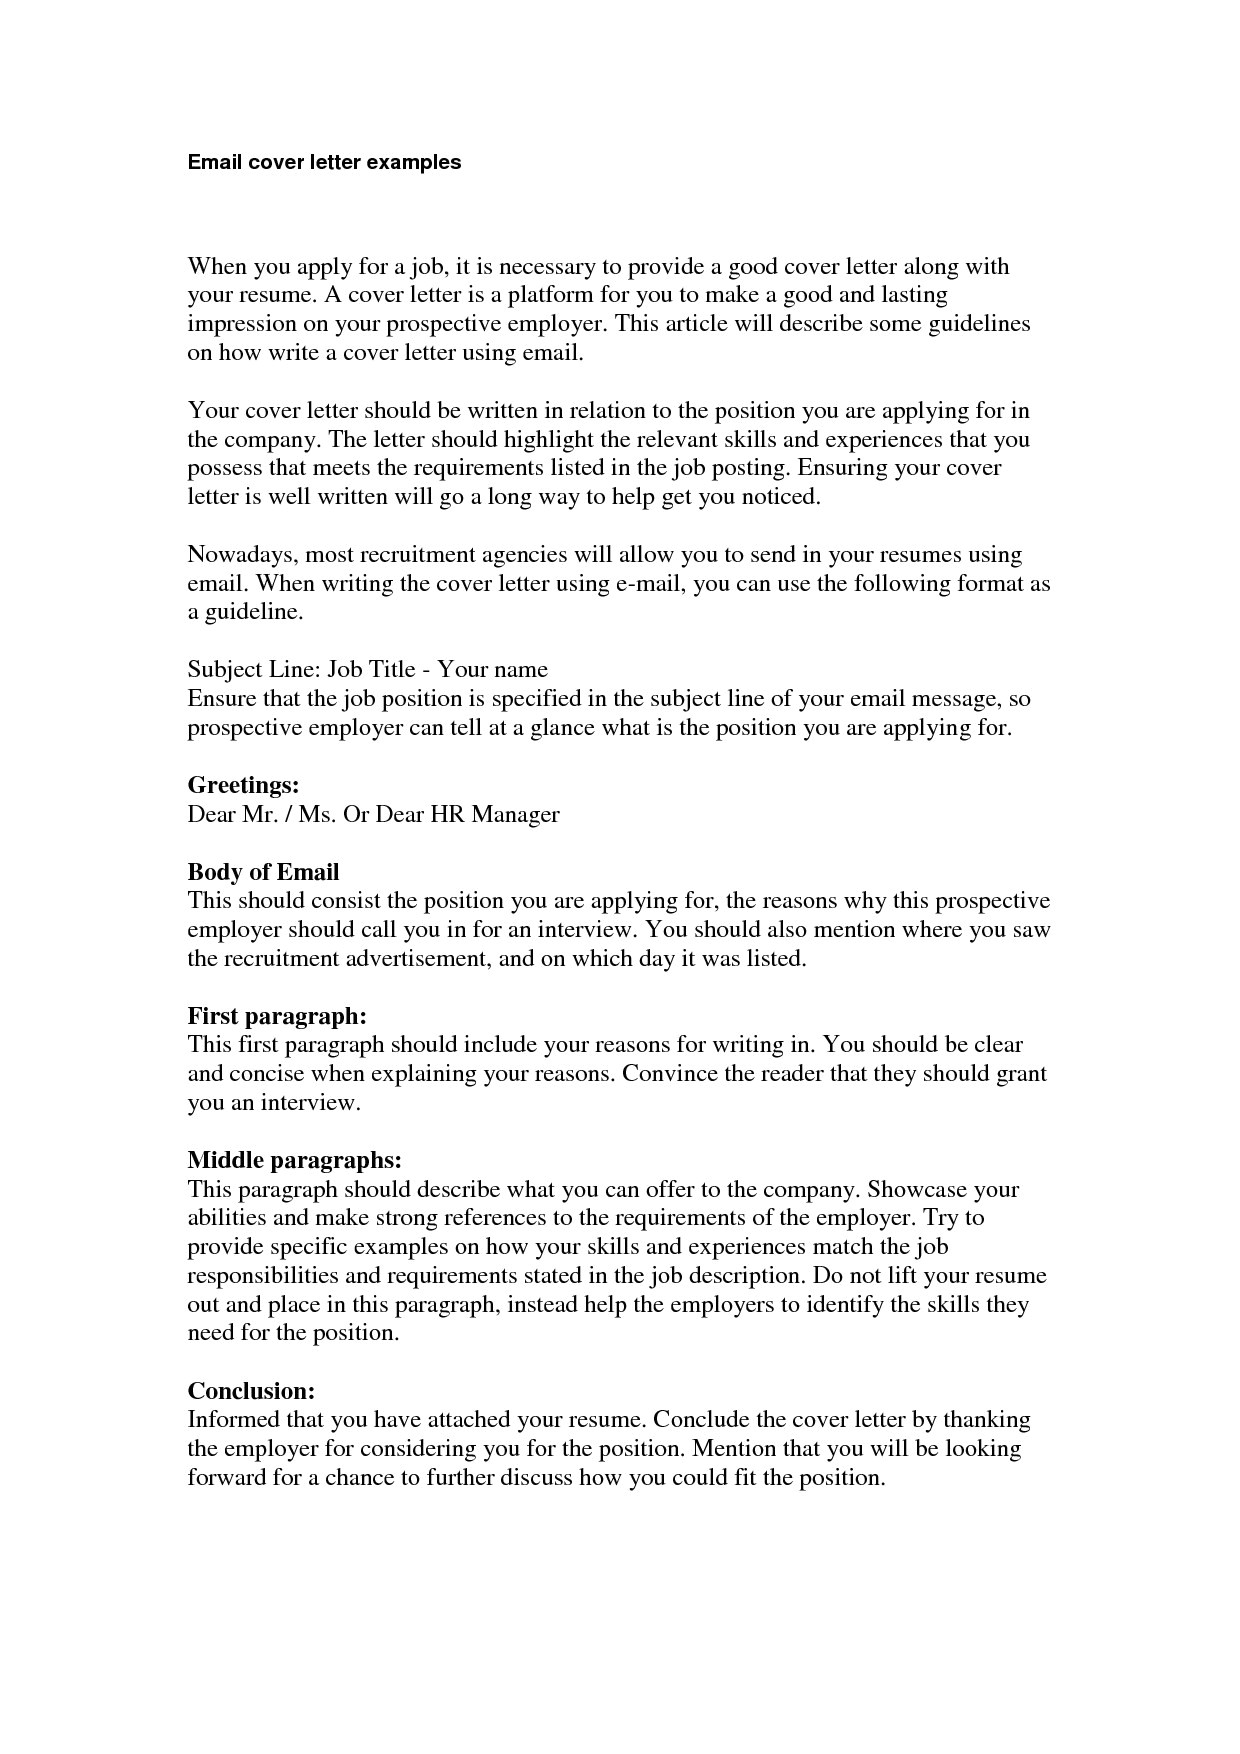 qualities of a good cover letter